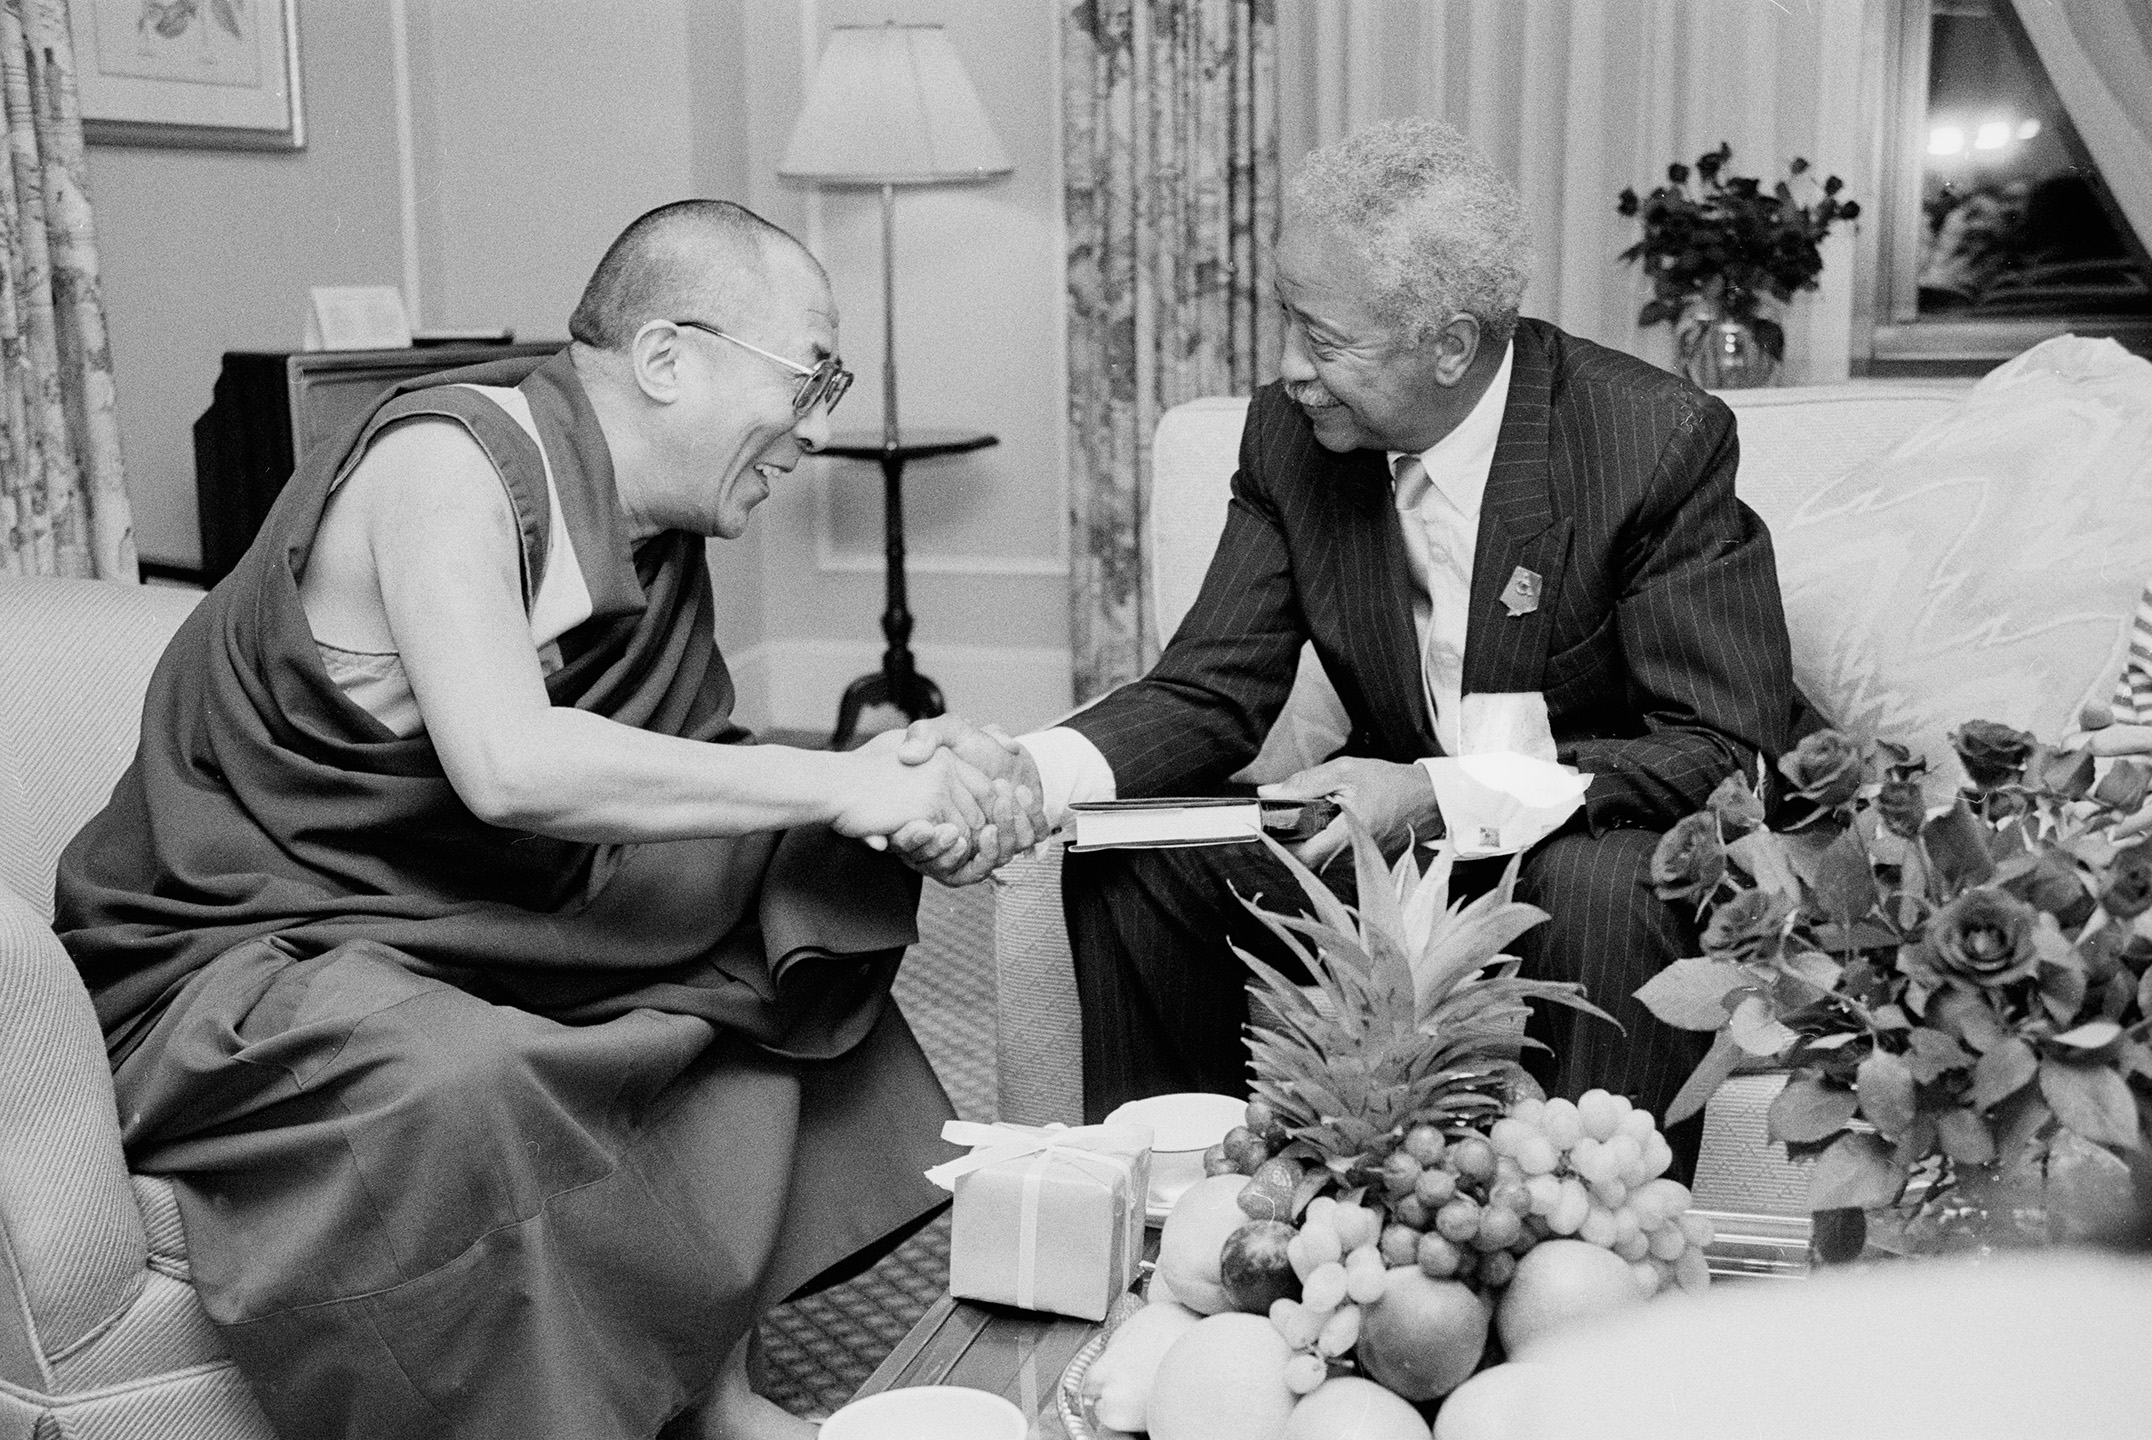 Mayor Dinkins meets with the Dali Lama, September 11, 1991